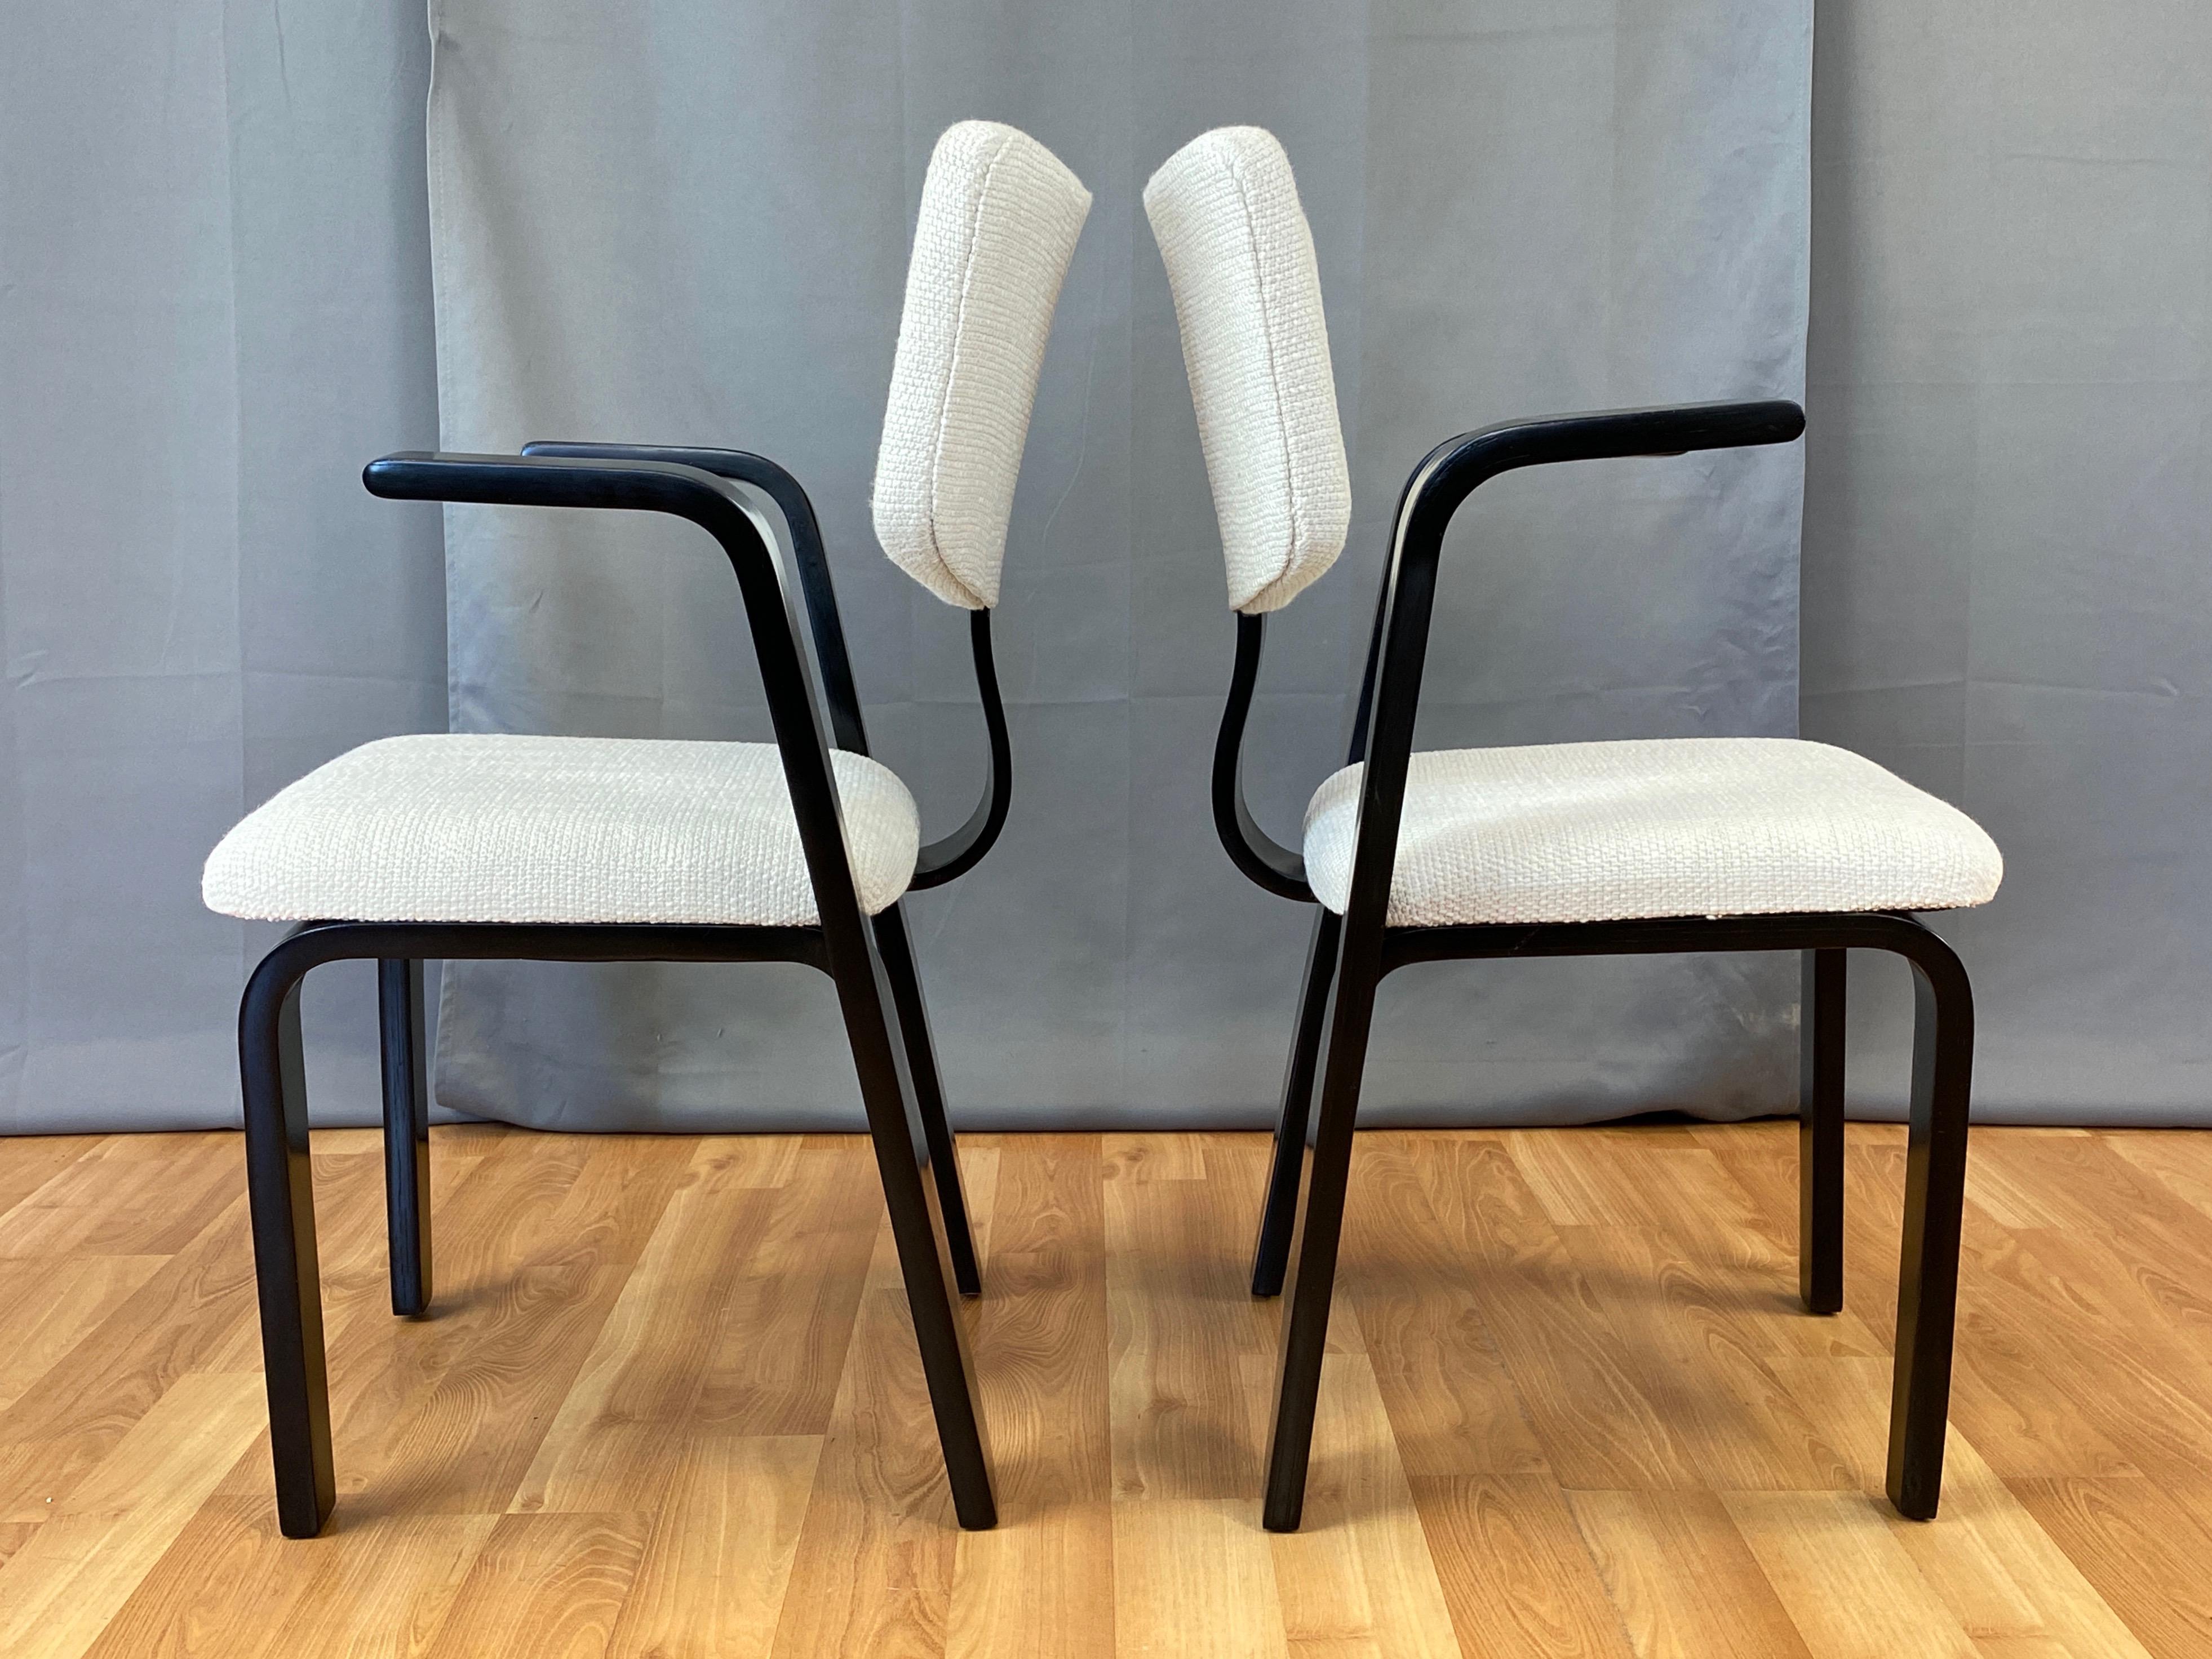 American Pair of Thonet Black Lacquered Bentwood Armchairs with Upholstered Seats, 1940s For Sale